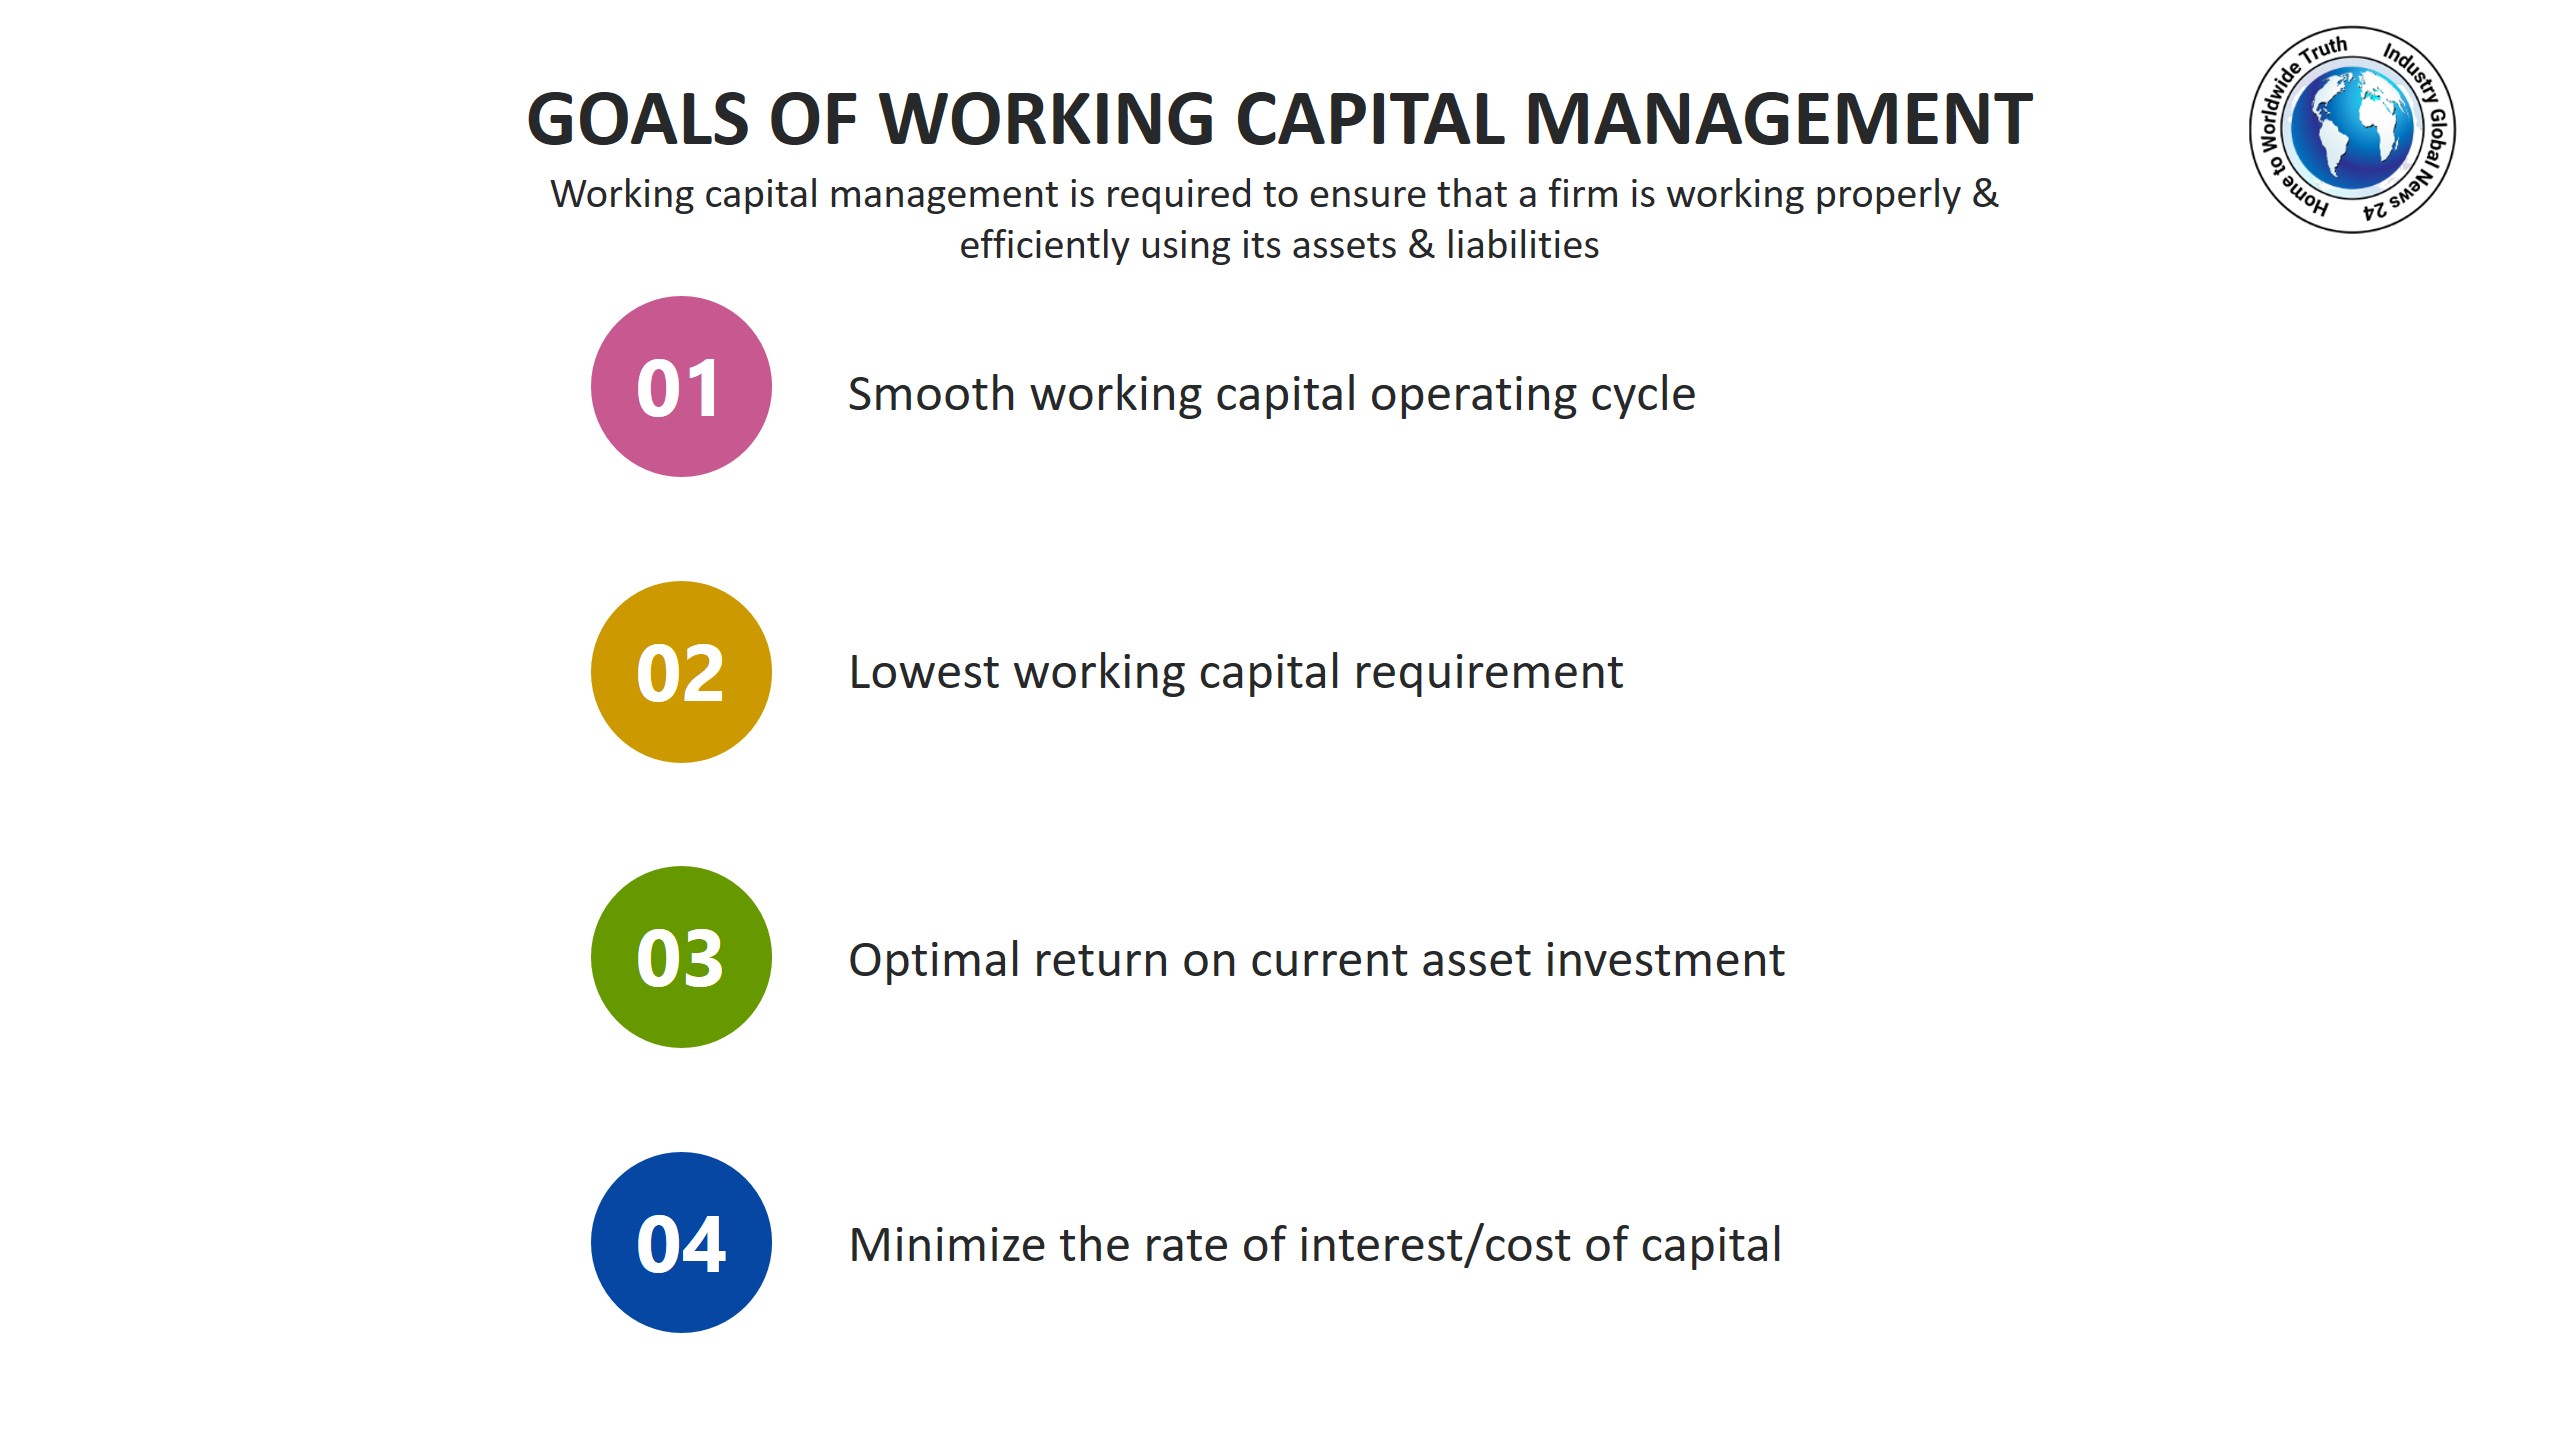 Goals of working capital management